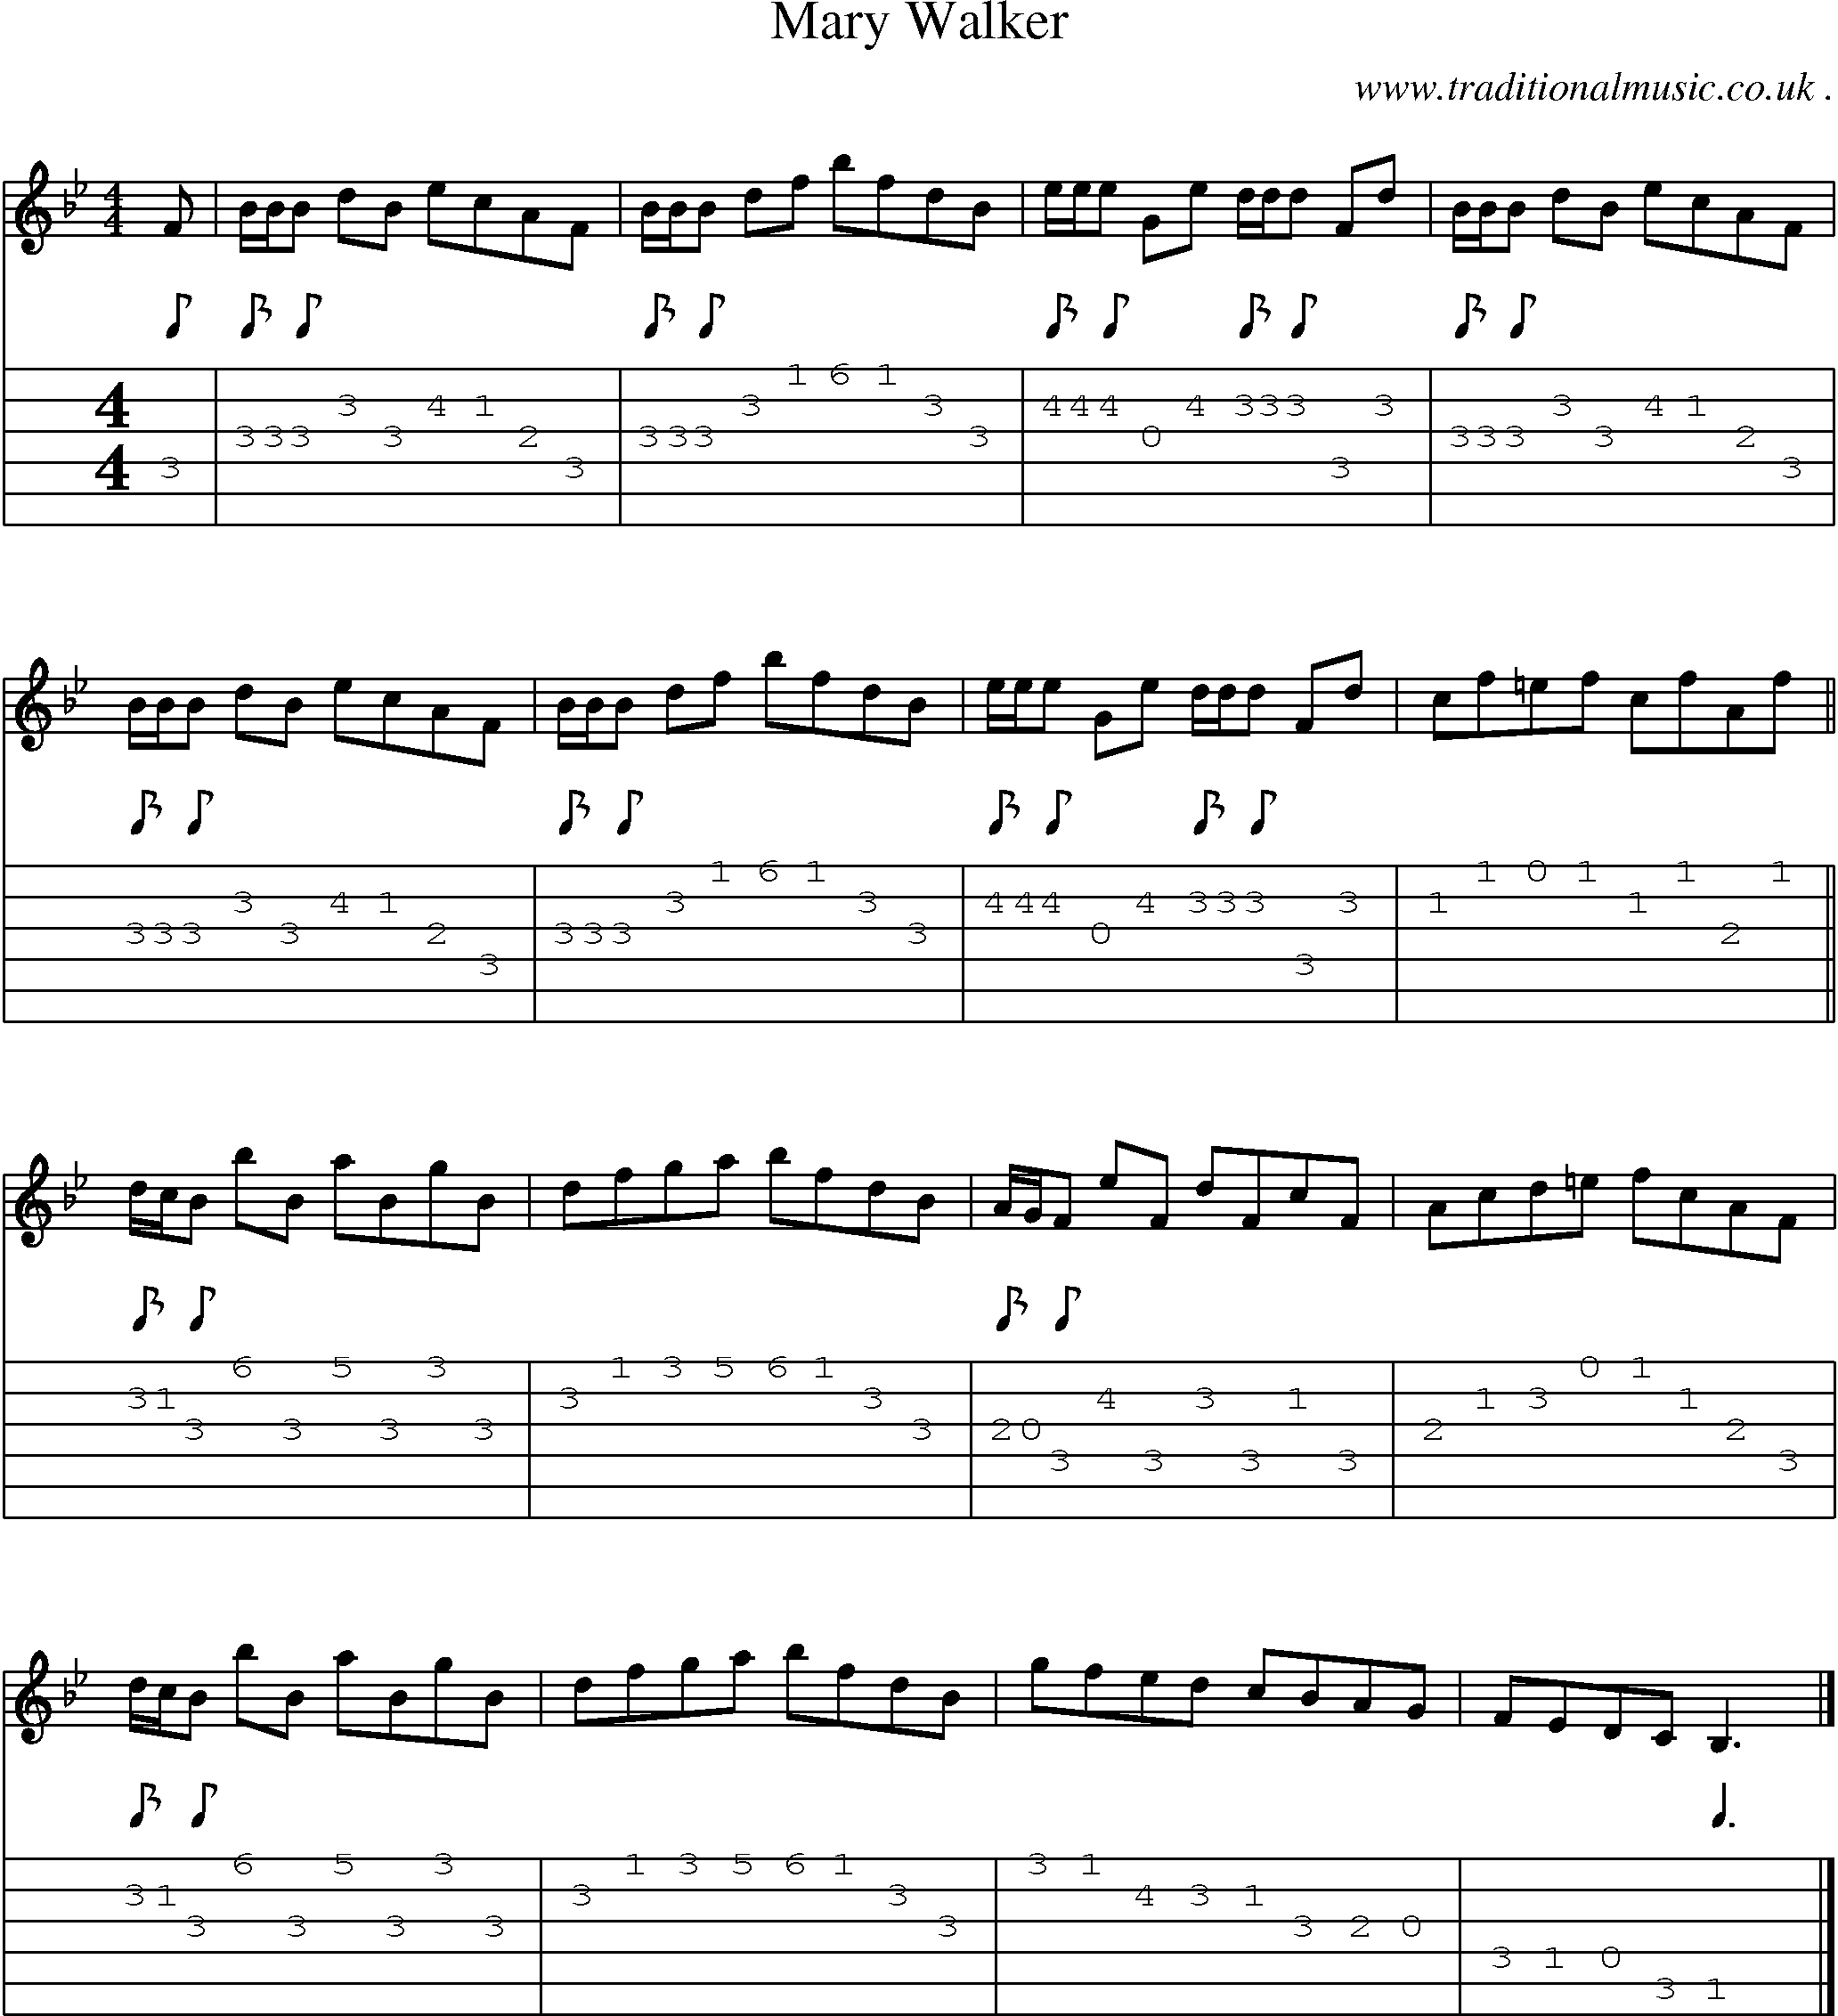 Sheet-music  score, Chords and Guitar Tabs for Mary Walker